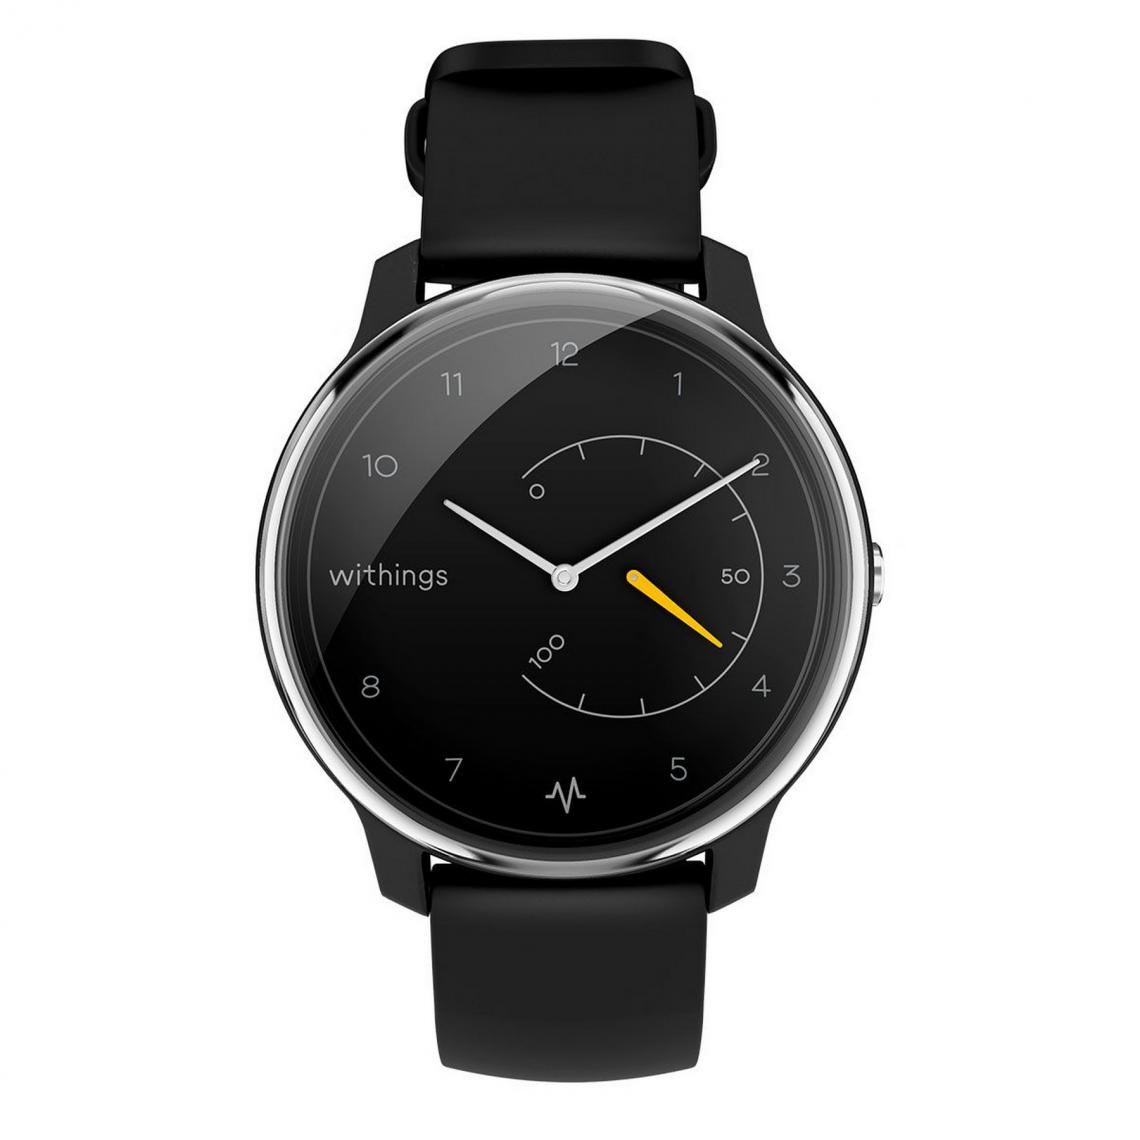 Withings - Montre connectée Homme WITHINGS Montres MOVE ECG 3 Aiguilles - Induction HWA08-model 1-all-Inter - Bracelet Silicone Noir - Montre connectée